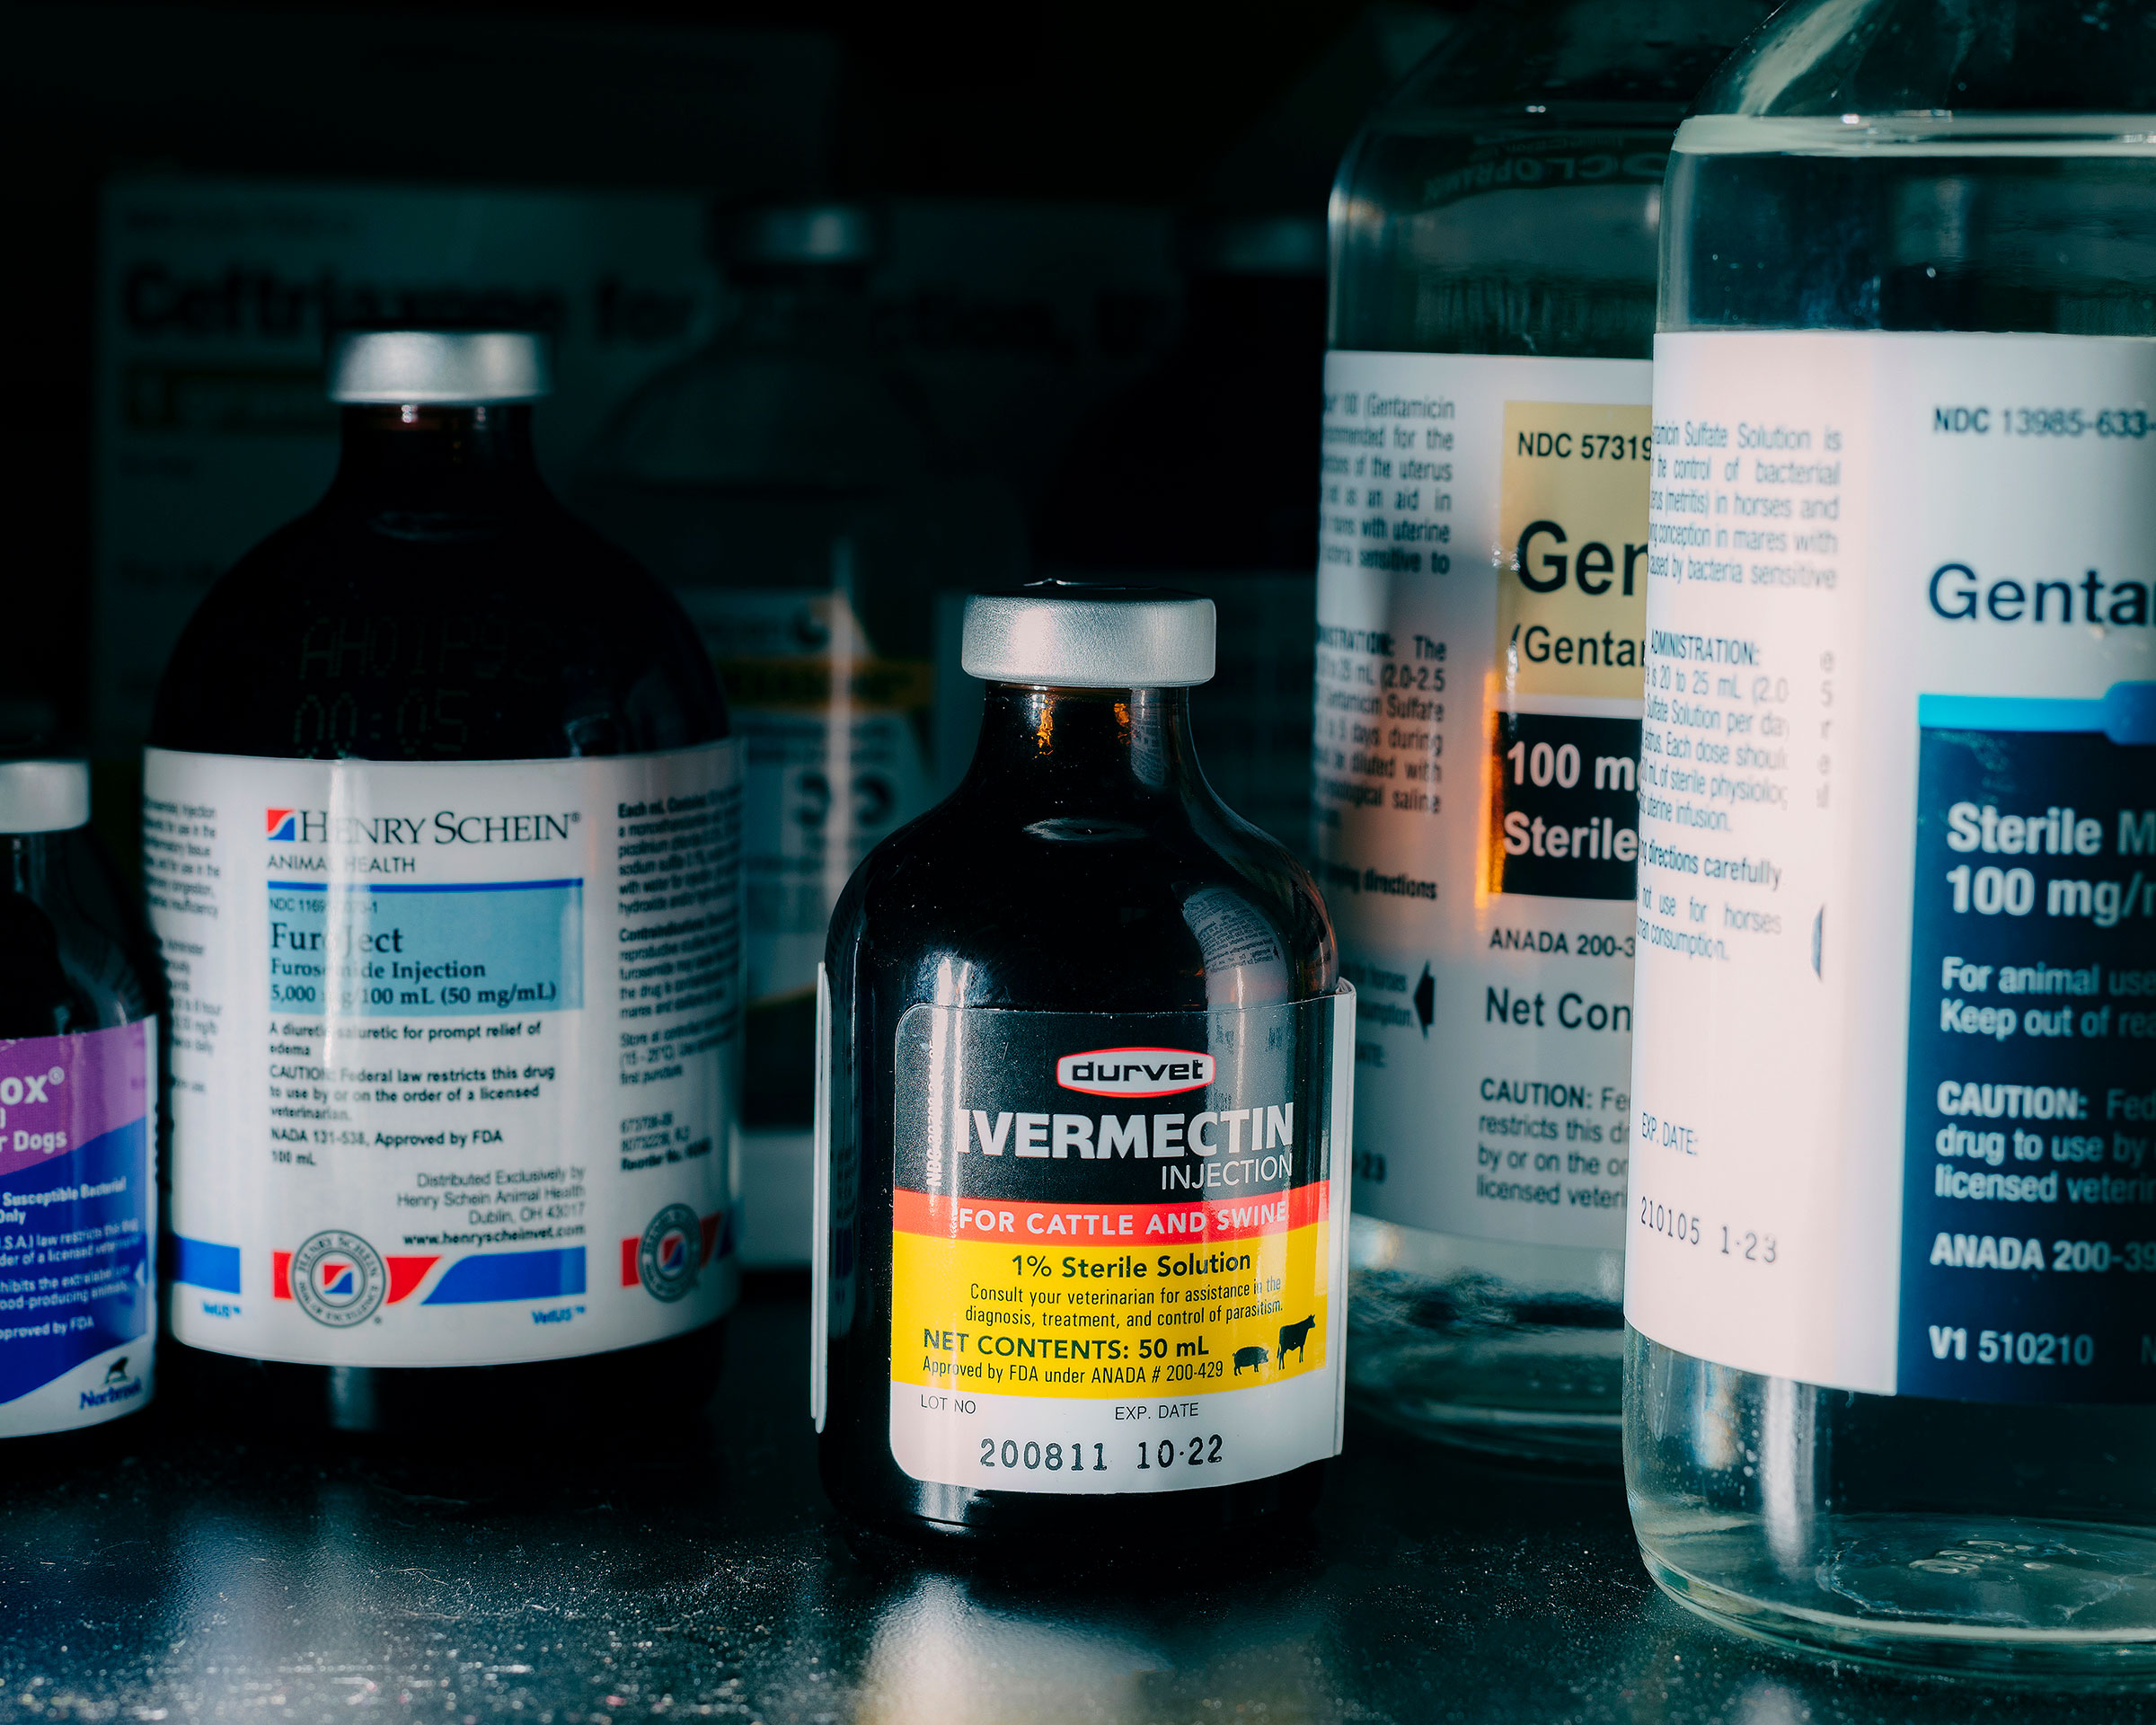 A bottle of Ivermectin in West Point, Miss. on Sept. 18, 2021. (Houston Cofield—The New York Times/Redux)